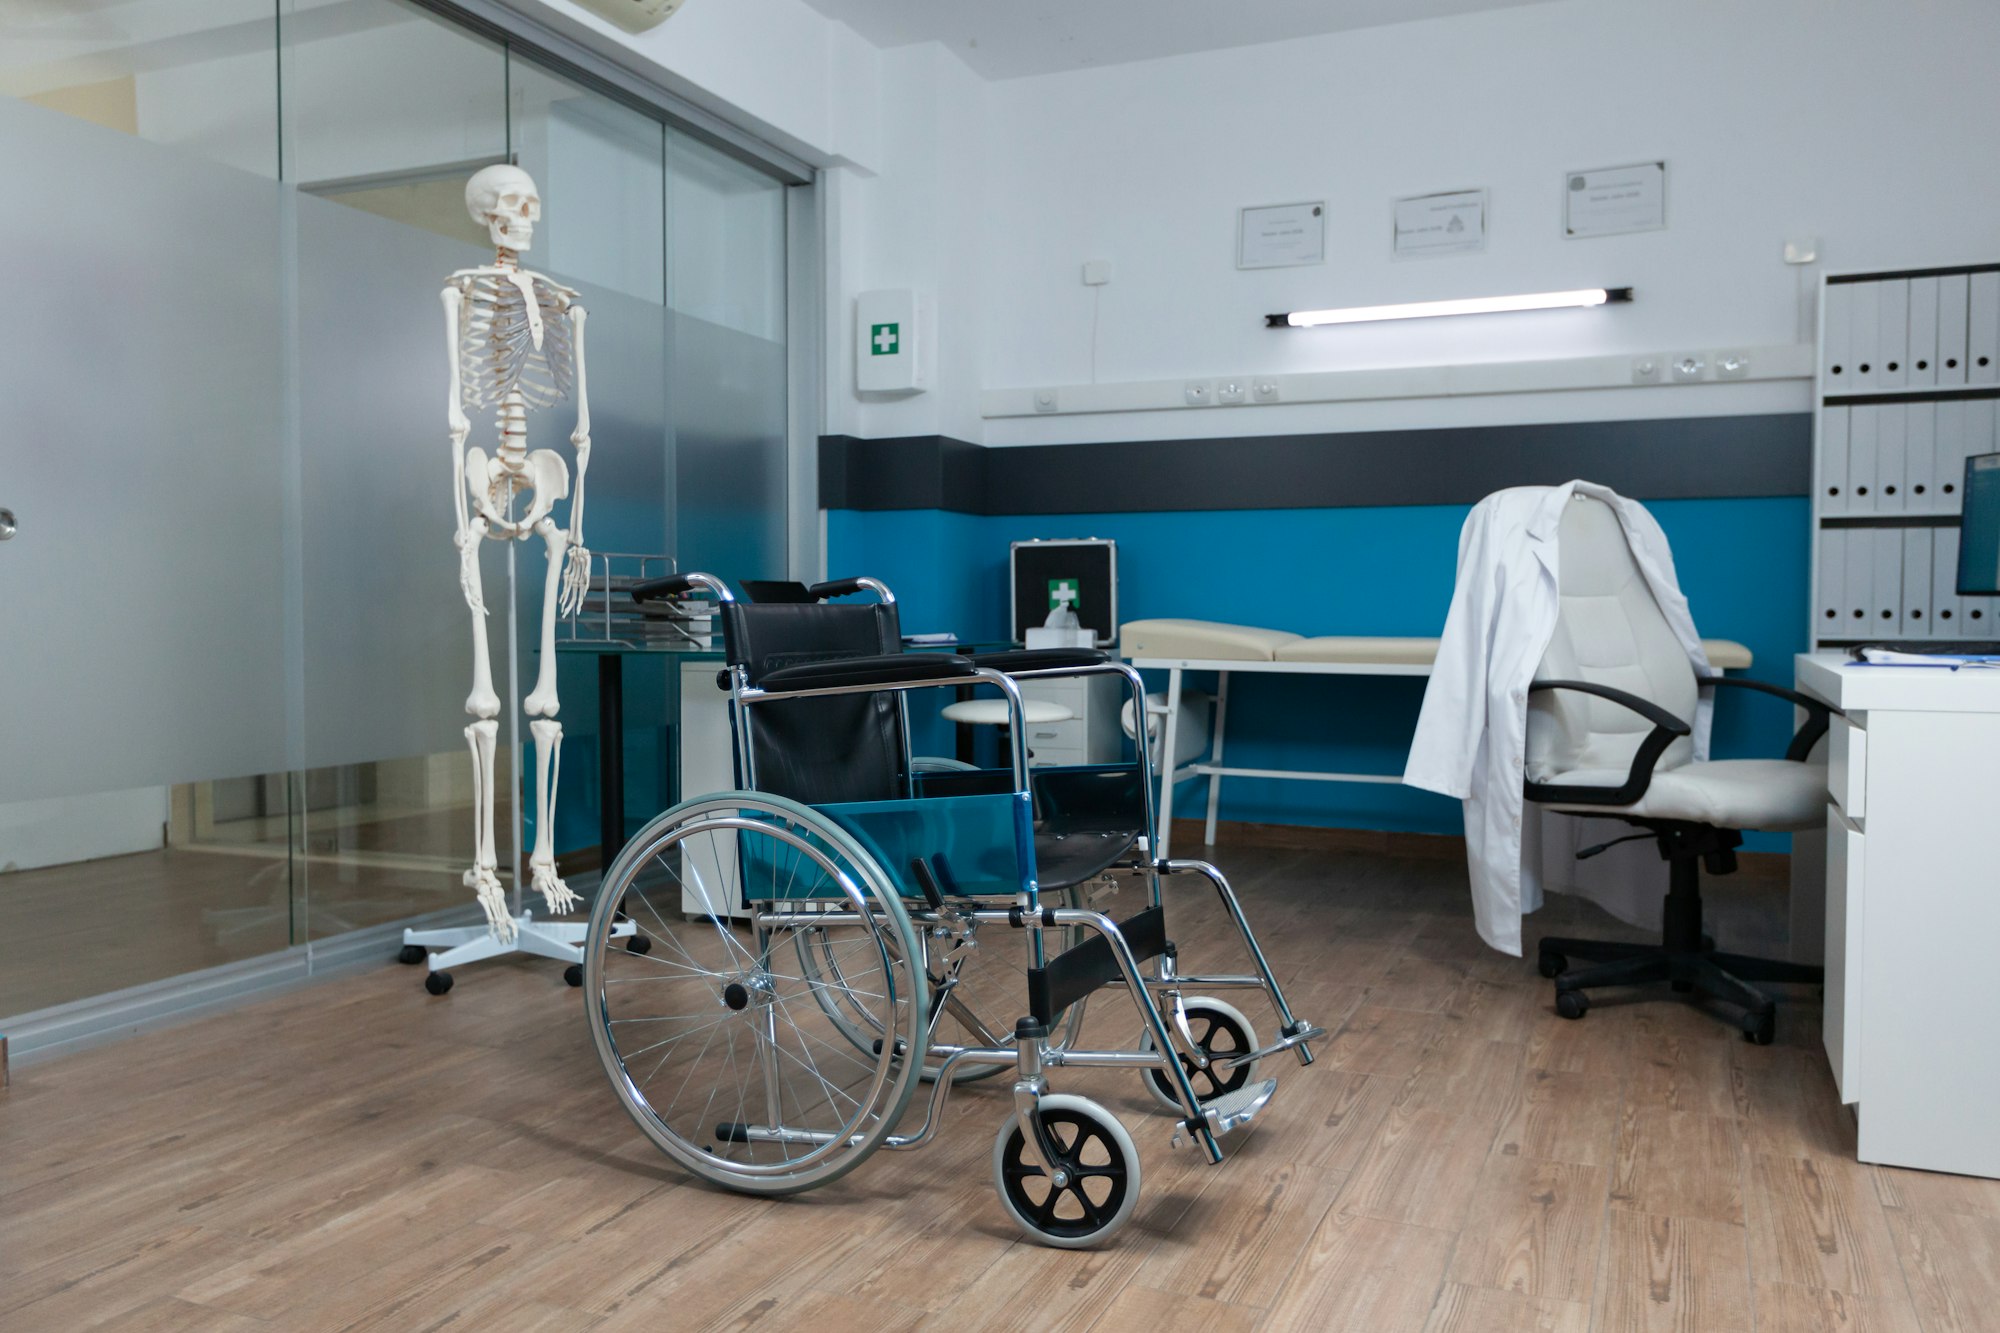 Medical wheelchair for invalid patient standing in empty doctor office